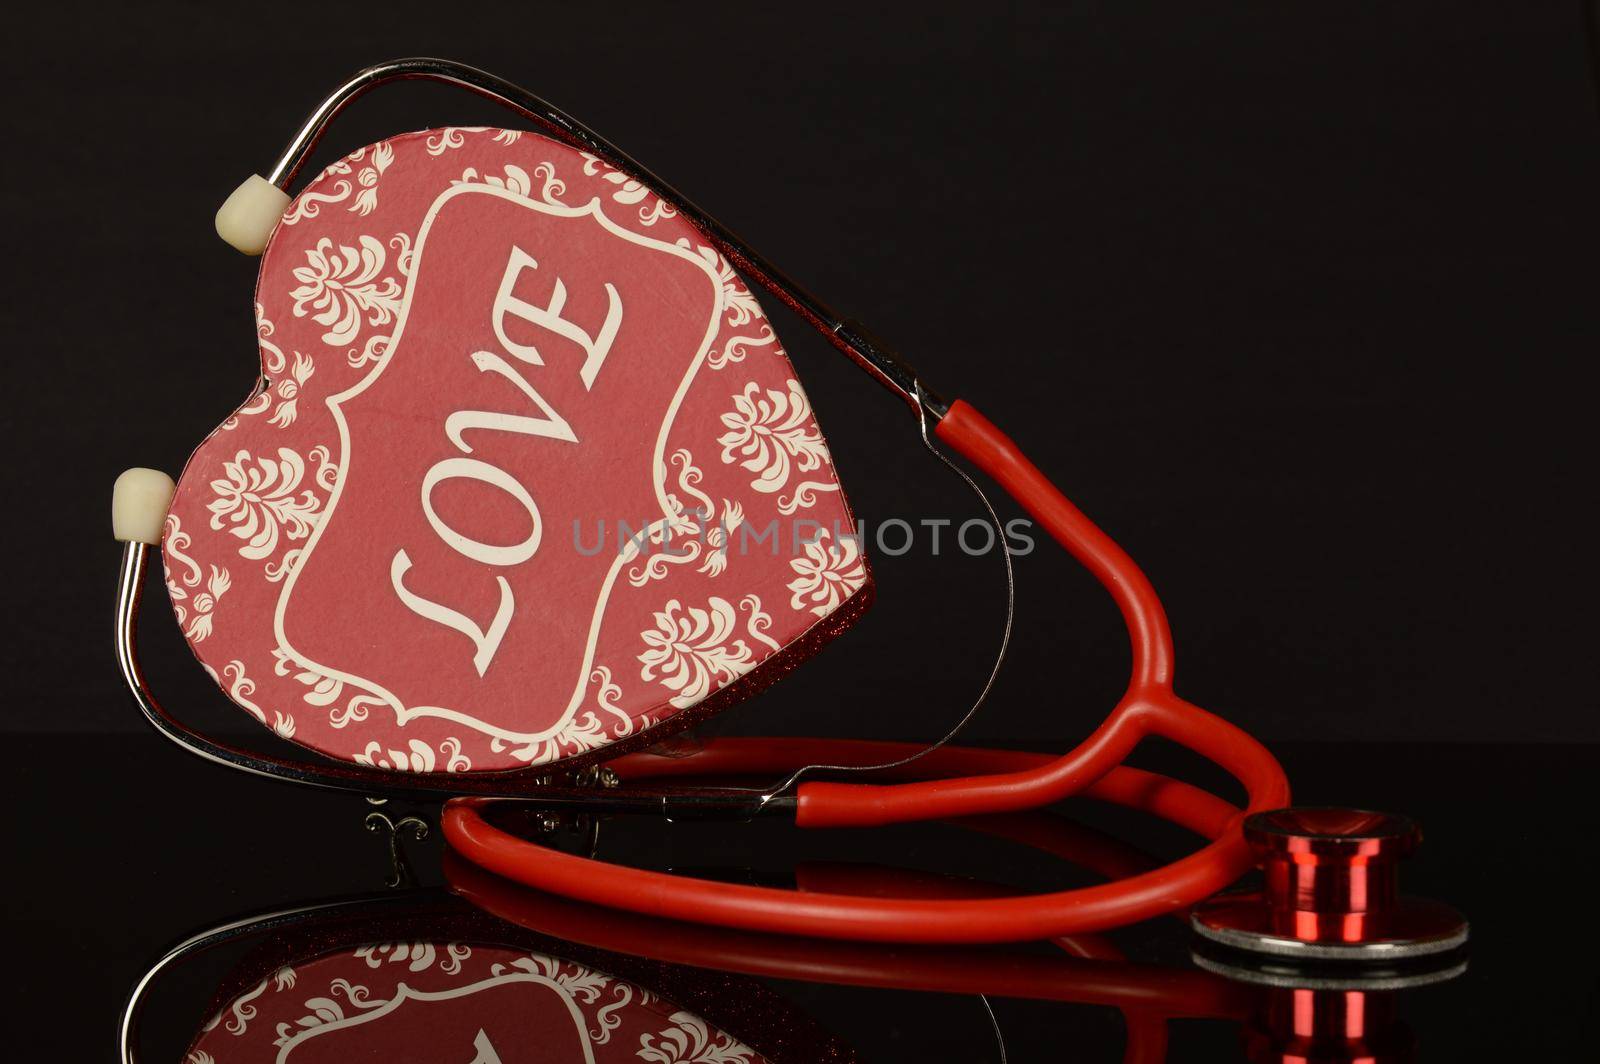 A red stethoscope and heart shaped box to remind us to love our hearts too.